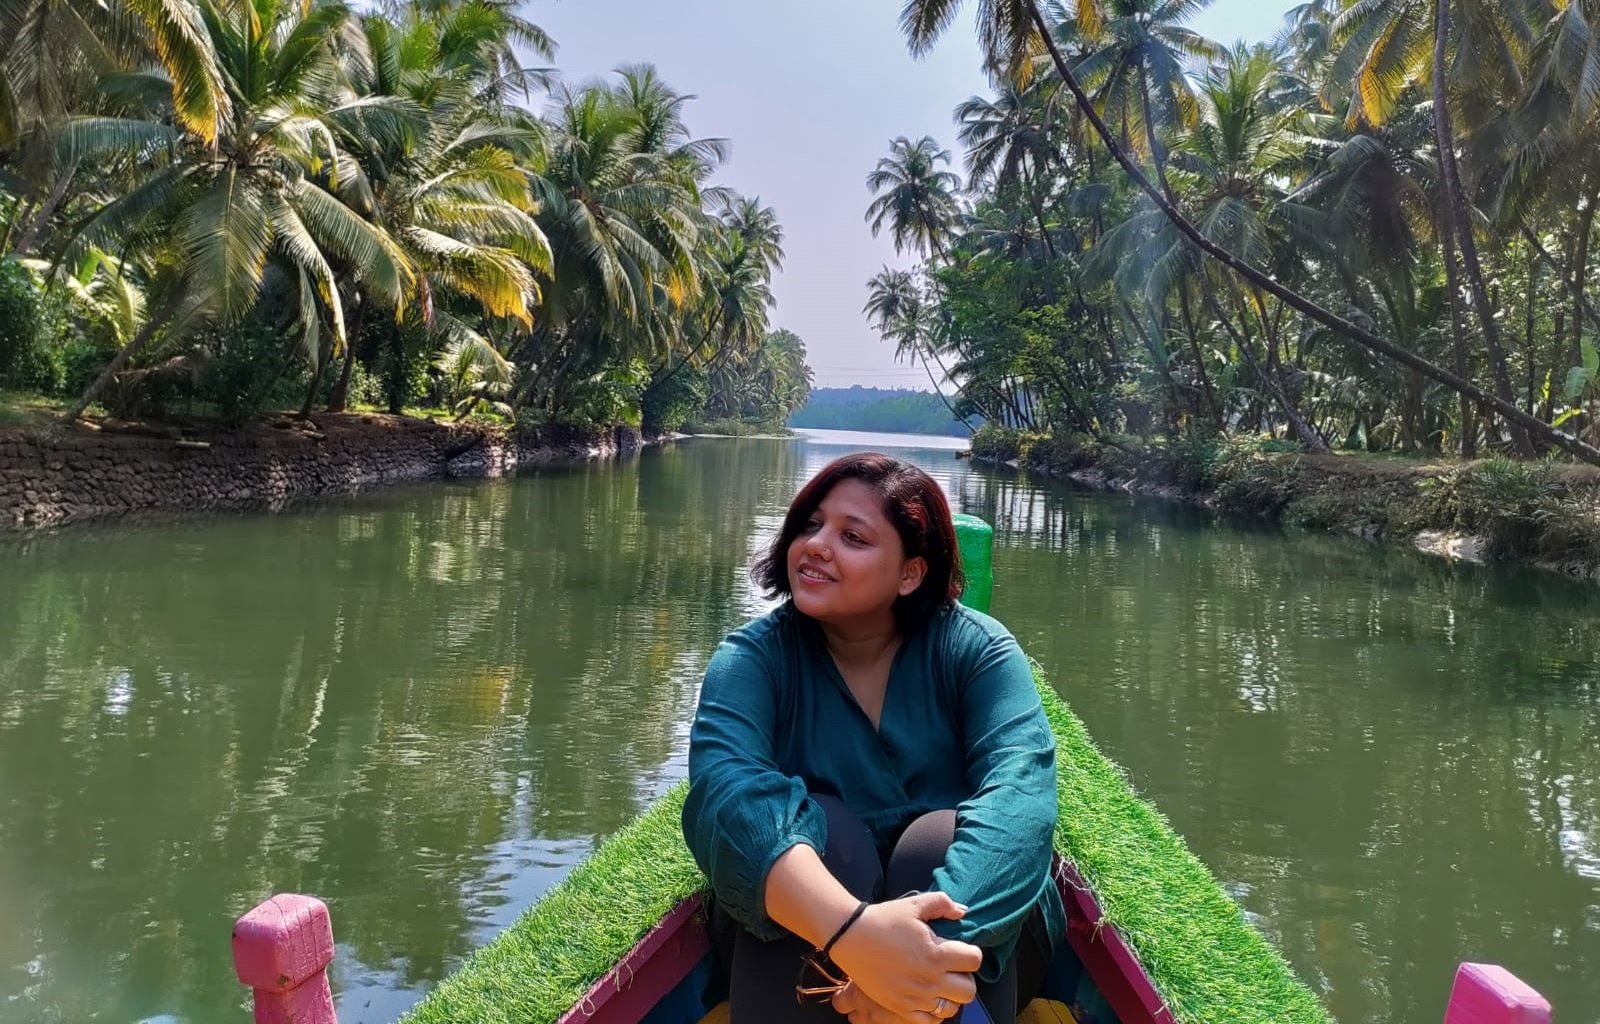 Shubhra enjoying a boat ride in the backwaters